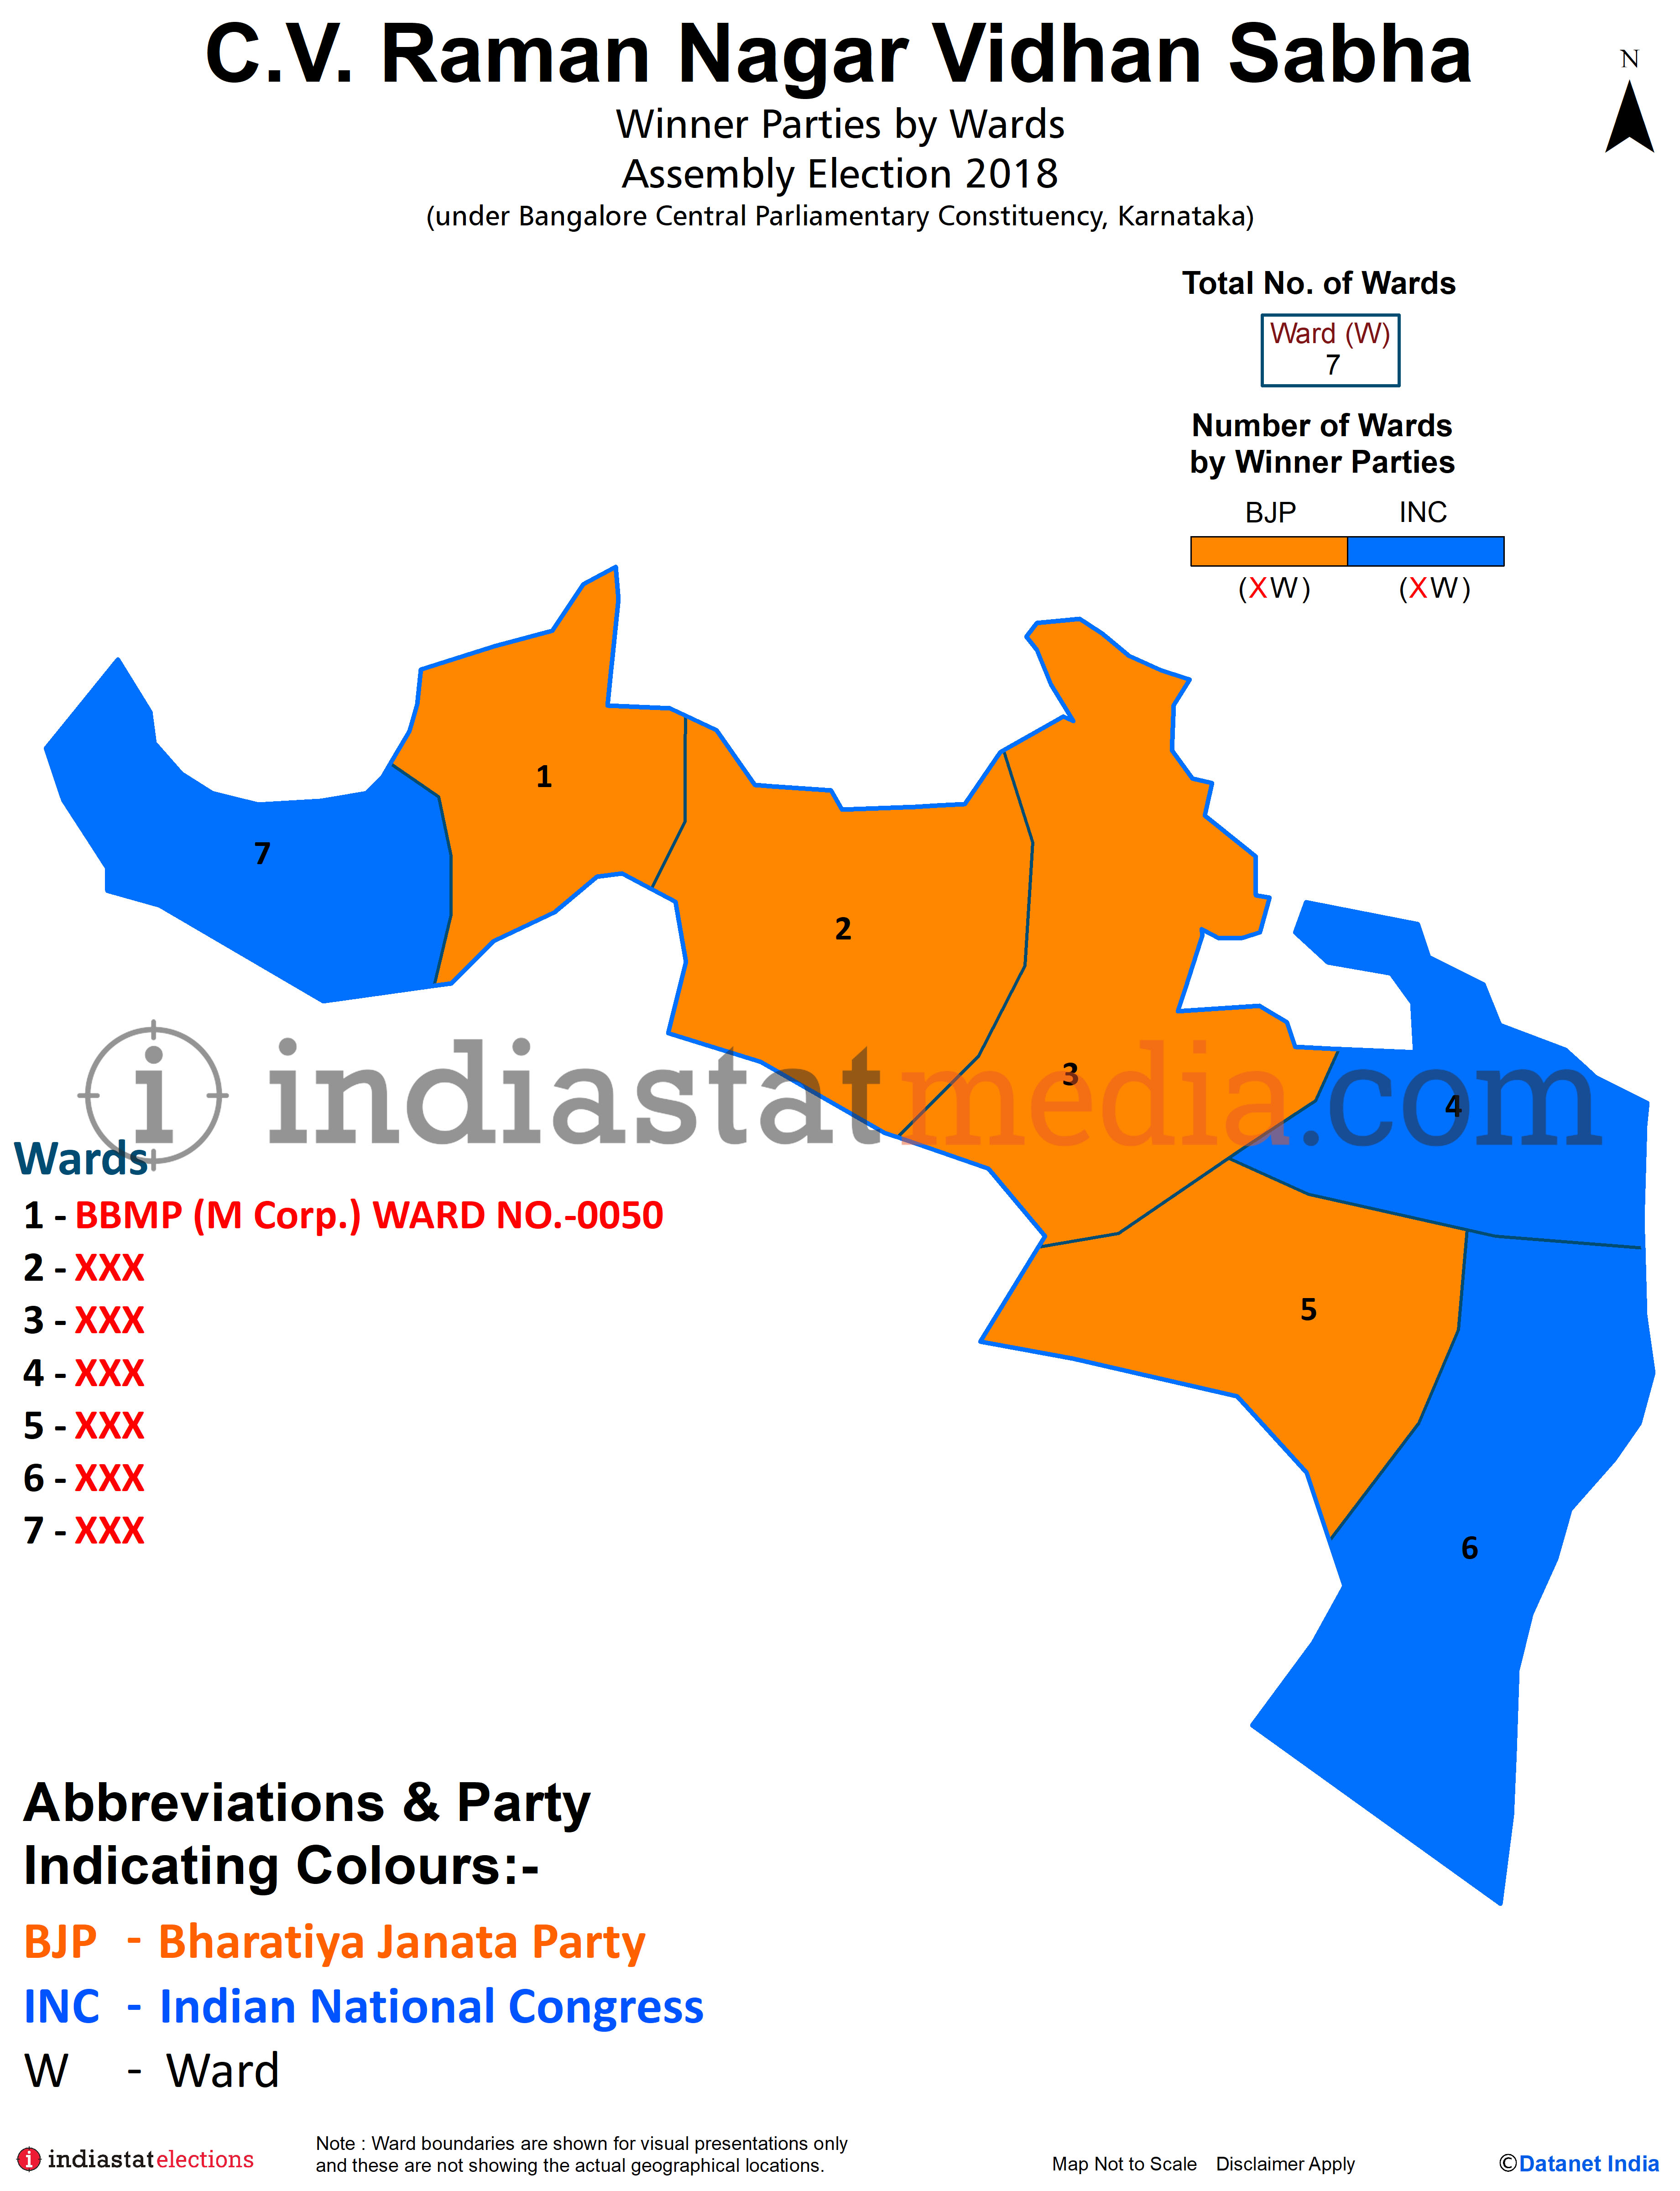 Winner Parties by Ward in C.V. Raman Nagar Assembly Constituency under Bangalore Central Parliamentary Constituency in Karnataka (Assembly Election - 2018)